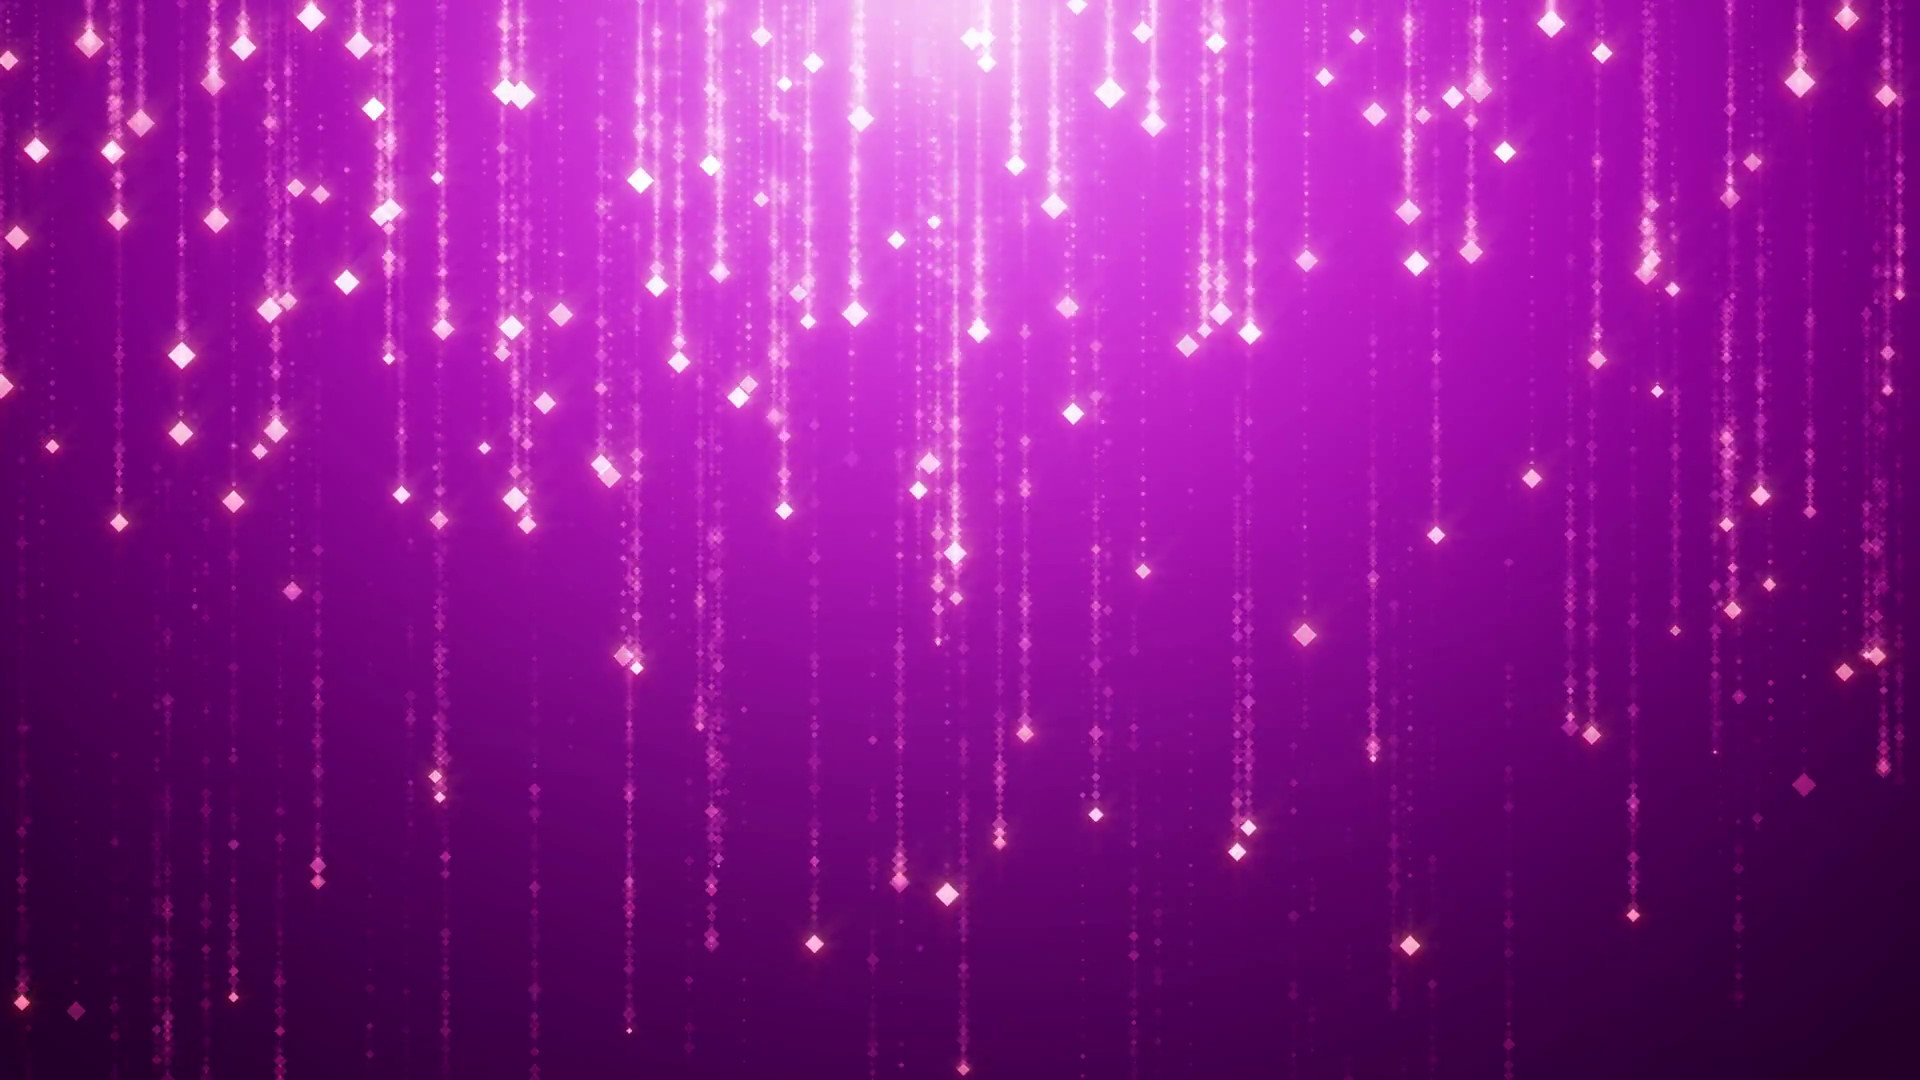 1920x1080 The golden falling particles spin and flicker on the purple magenta  background. Abstract background for fashionable glamor and luxury luxury  Motion ...